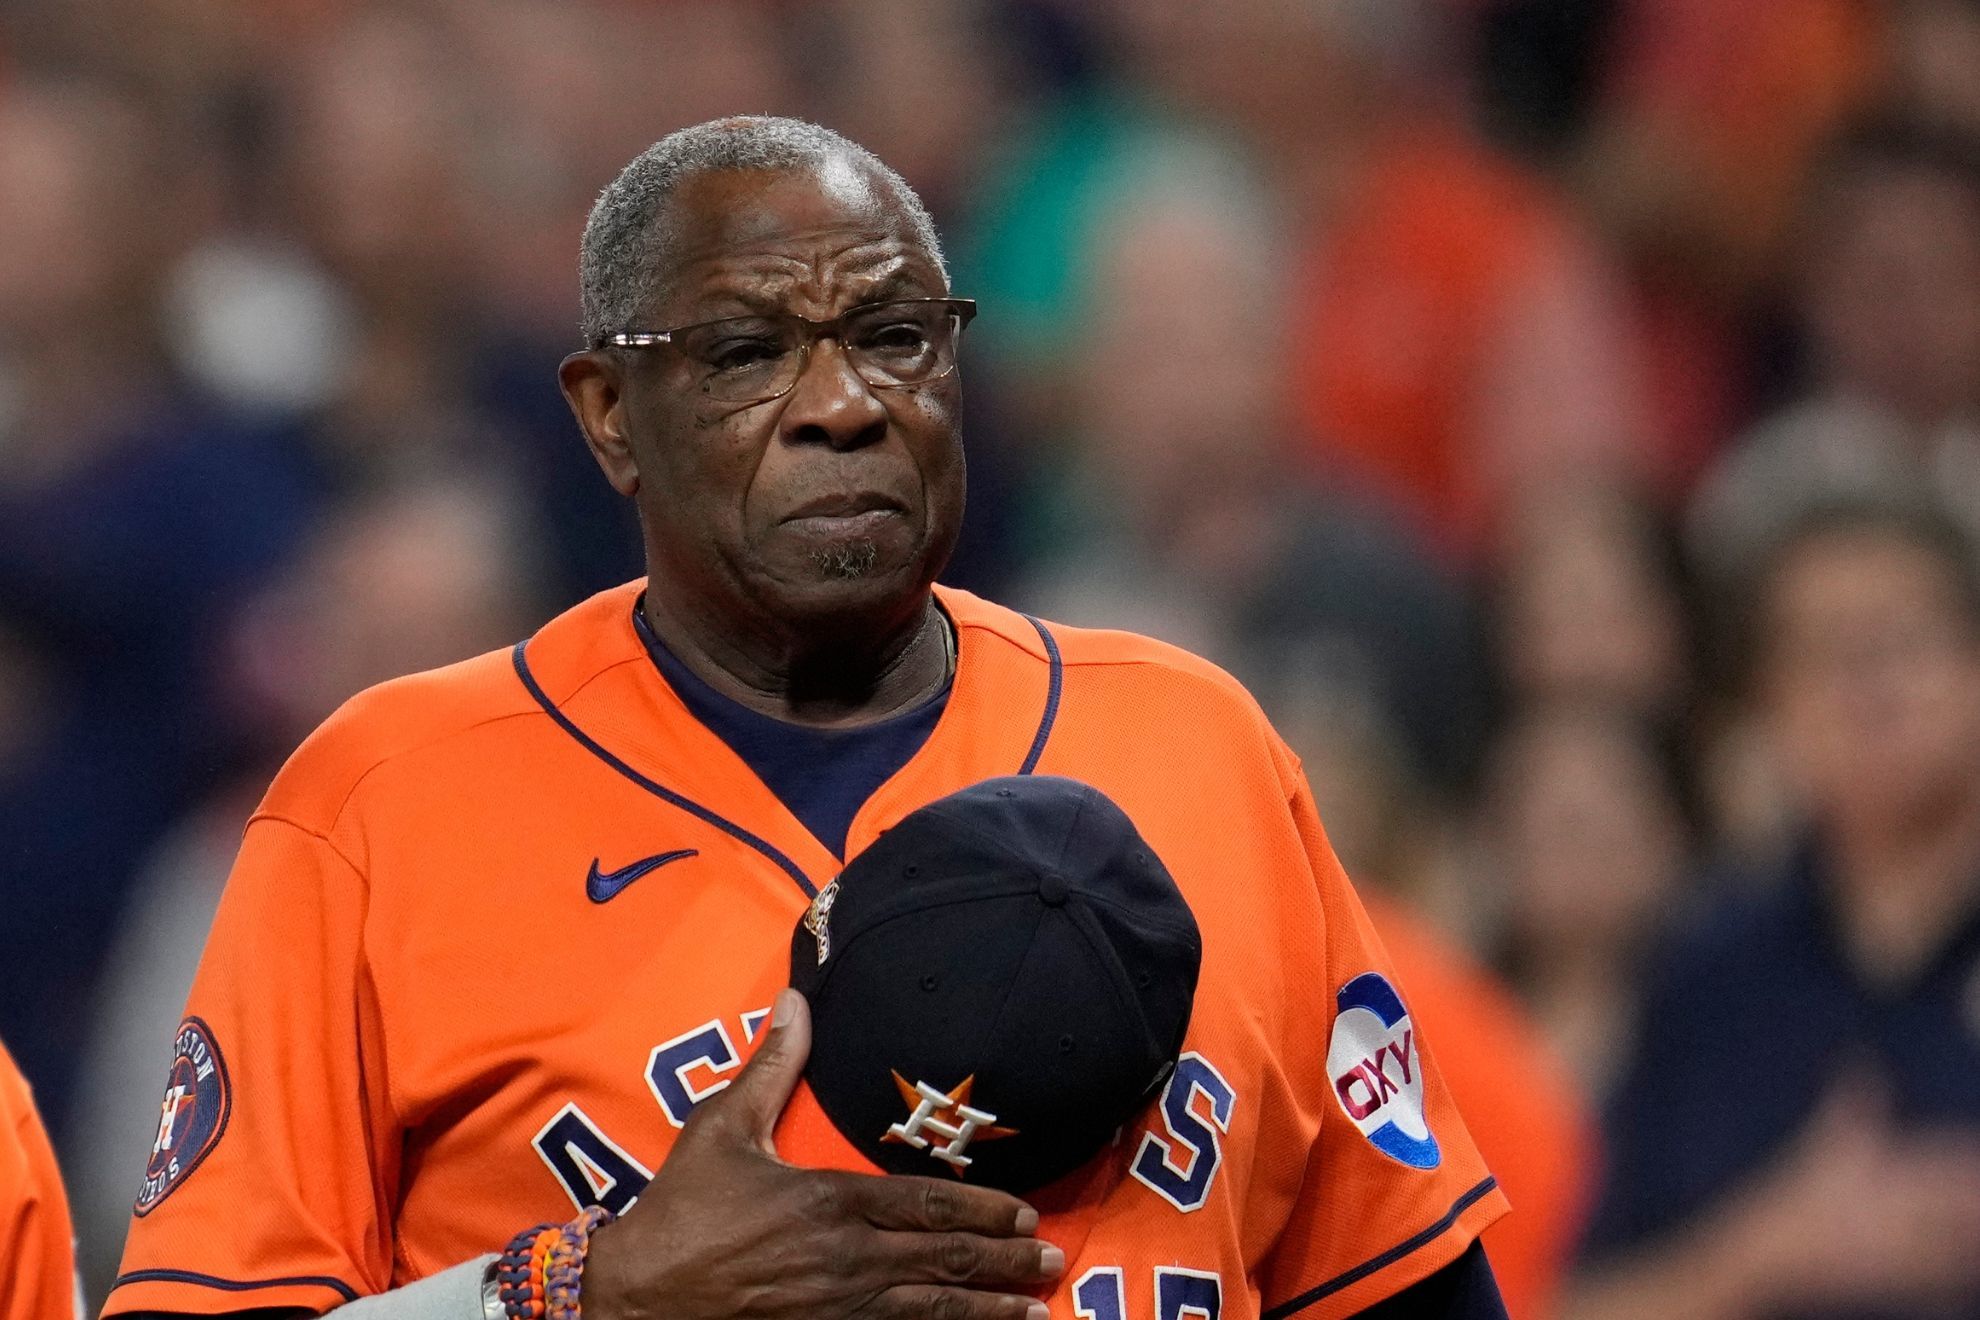 Astros manager Dusty Baker reportedly retiring following ALCS defeat to Rangers